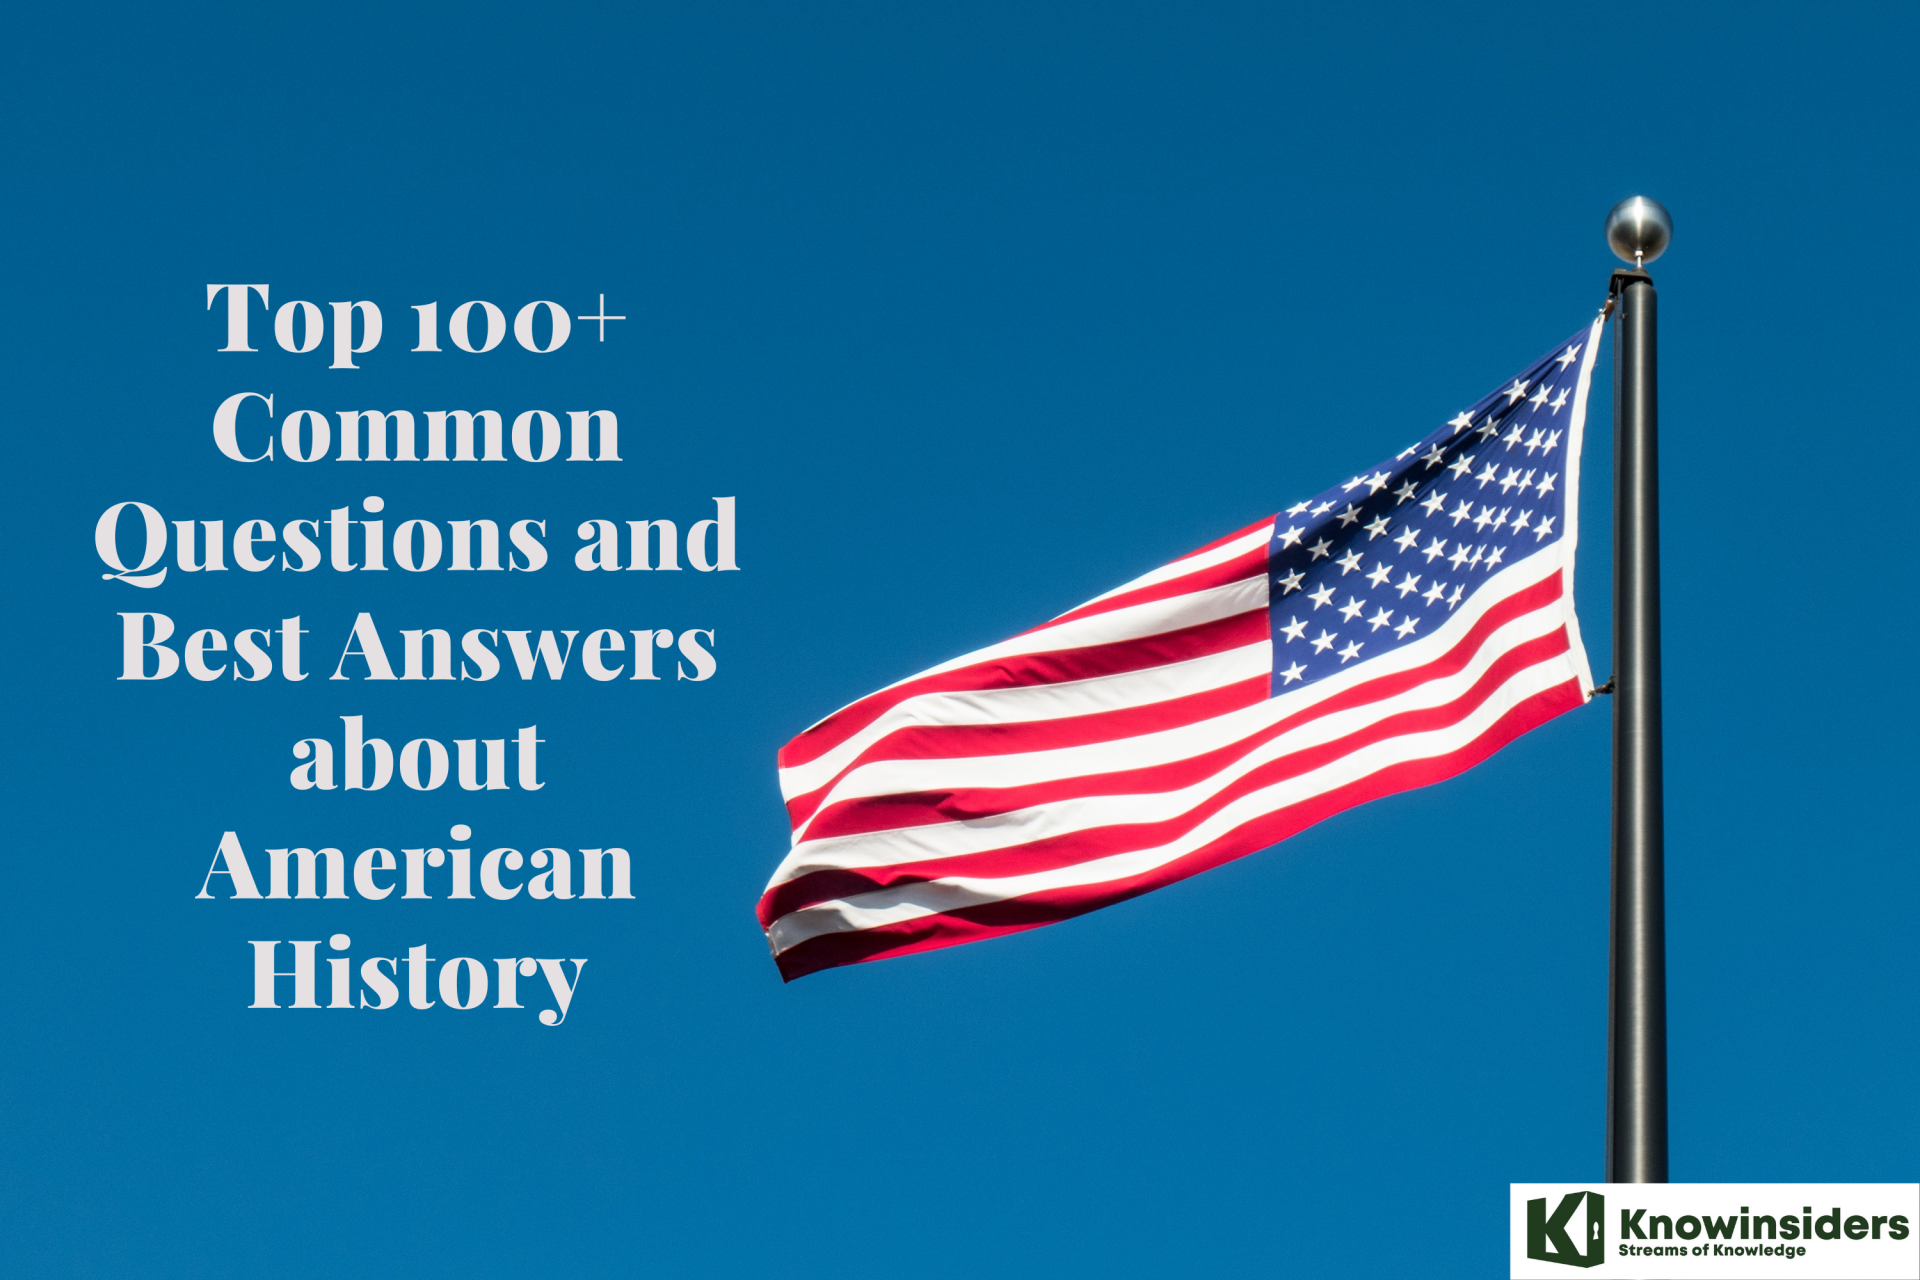 Top 100+ Common Questions and Best Answers about American History